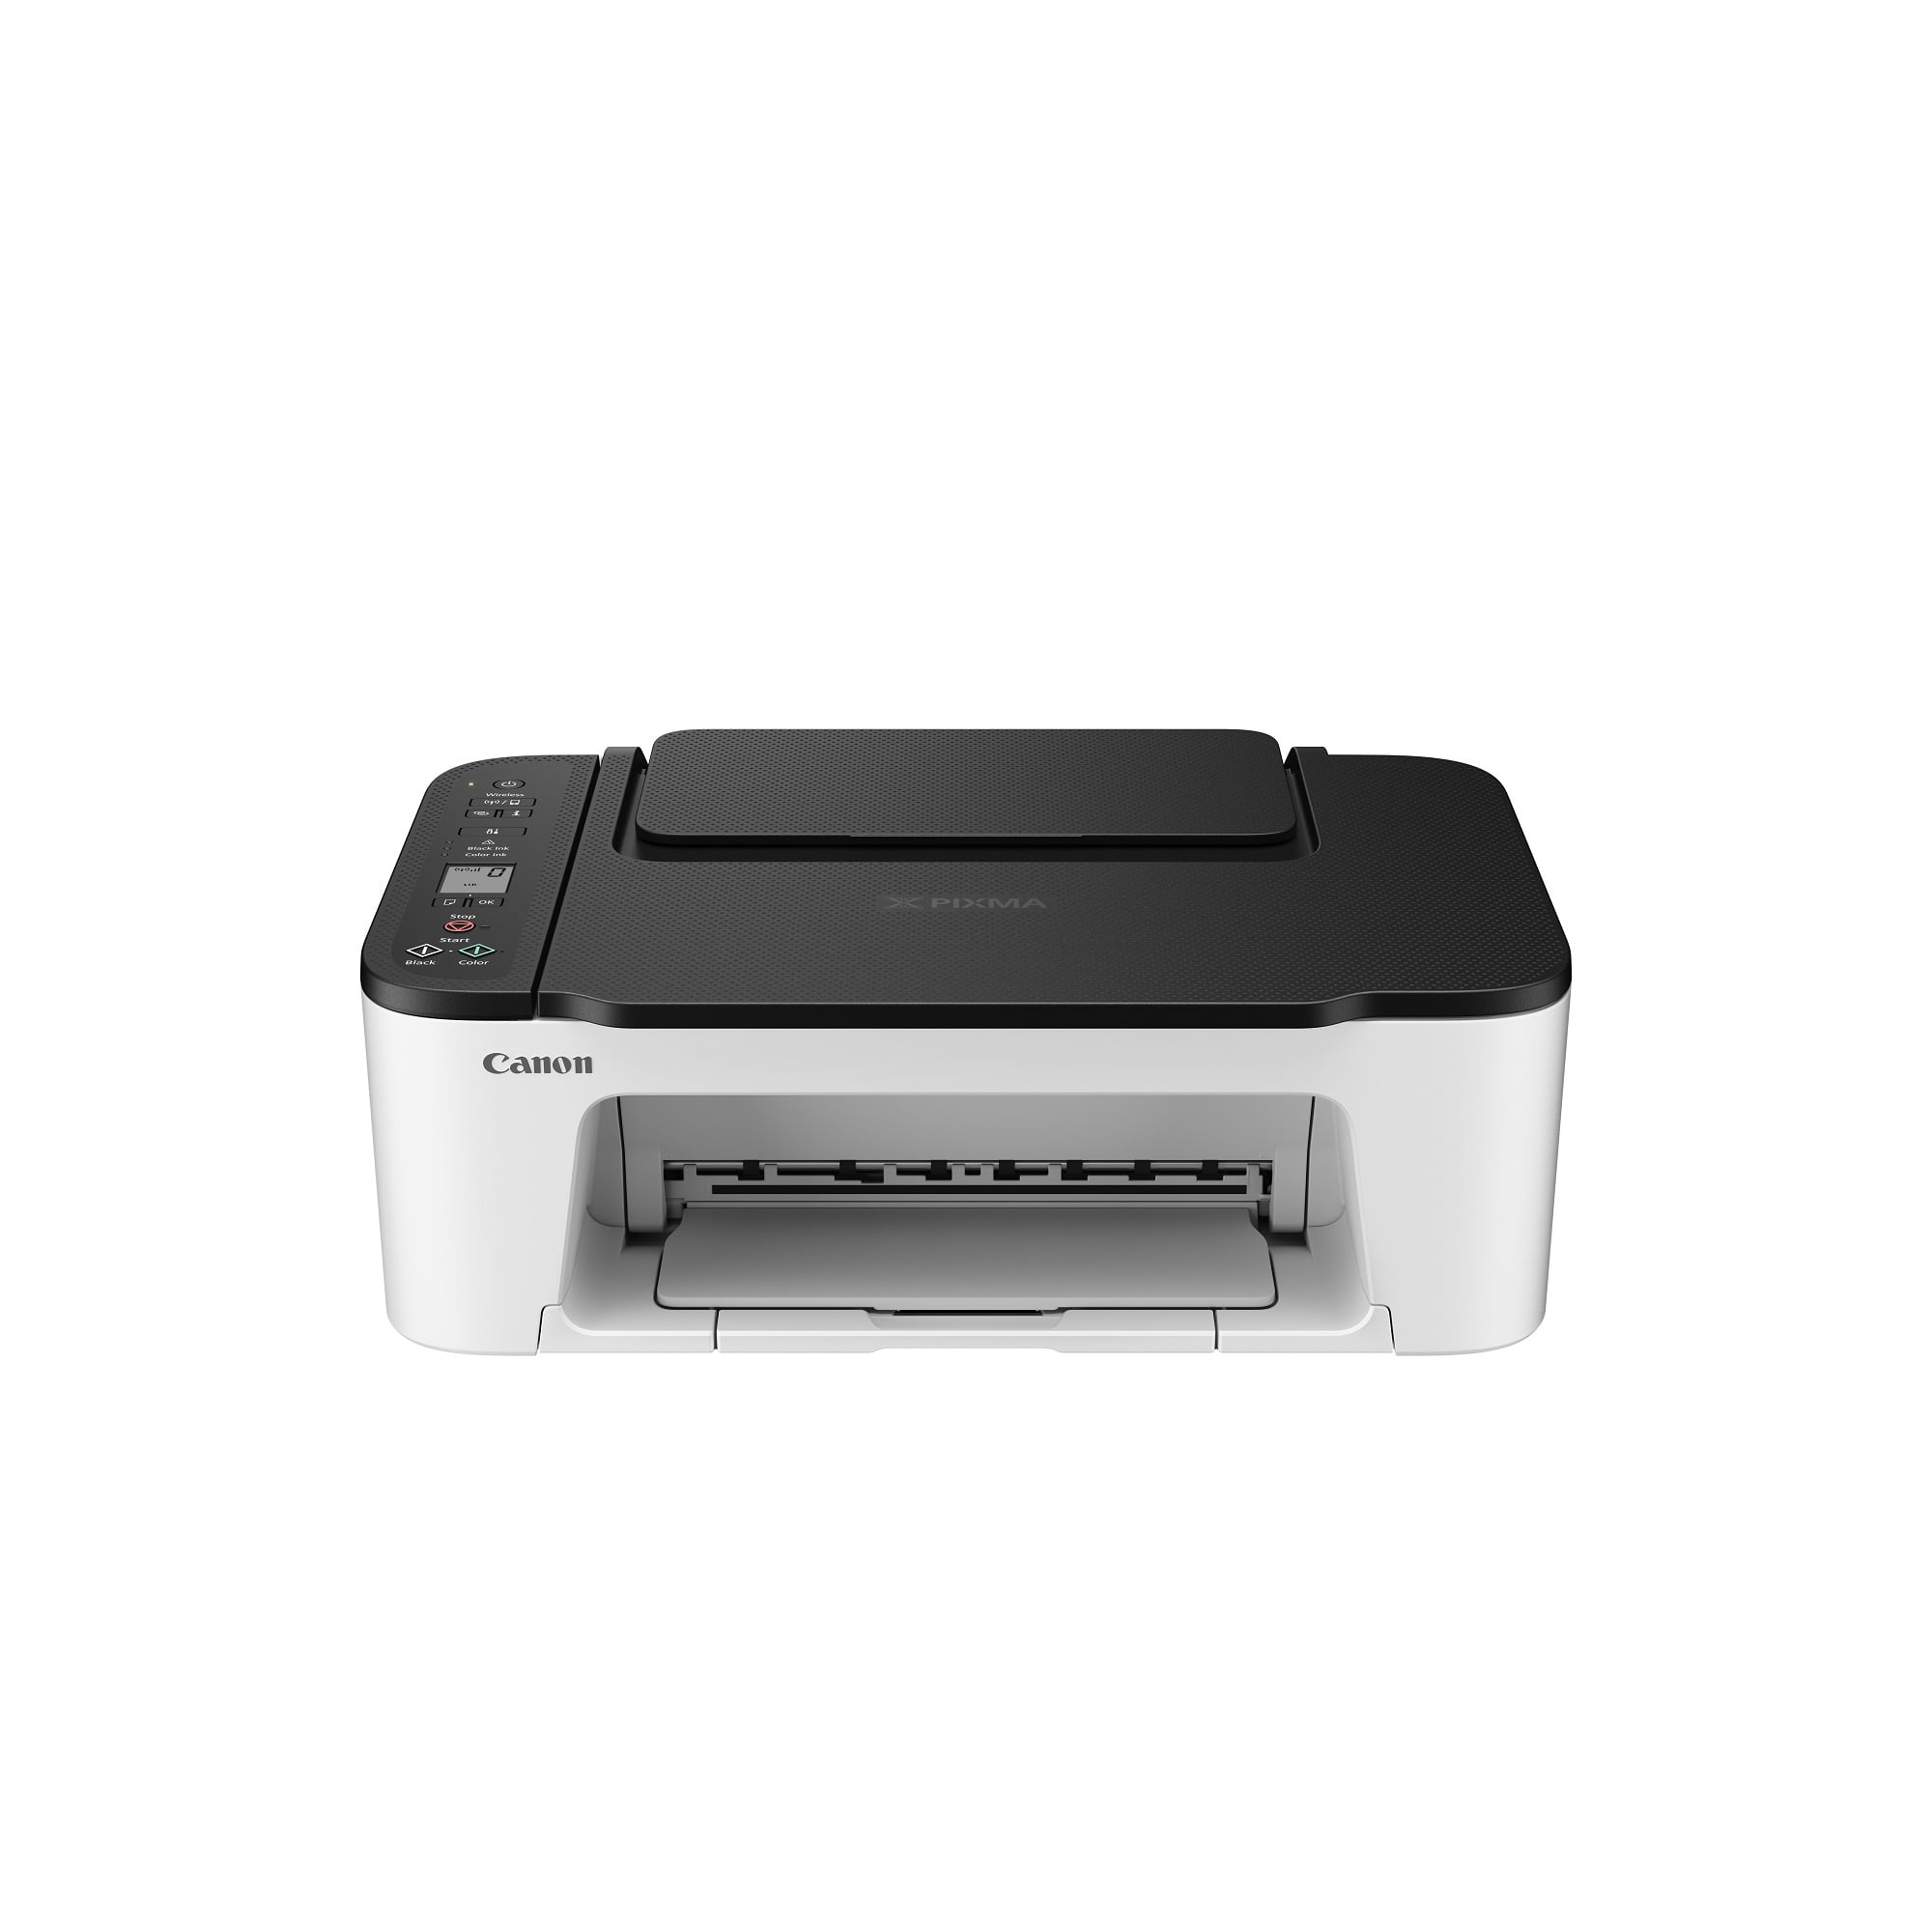 Syndicaat radicaal dealer Canon PIXMA TS3522 All-in-One Wireless InkJet Printer with Print, Copy and  Scan Features - Walmart.com